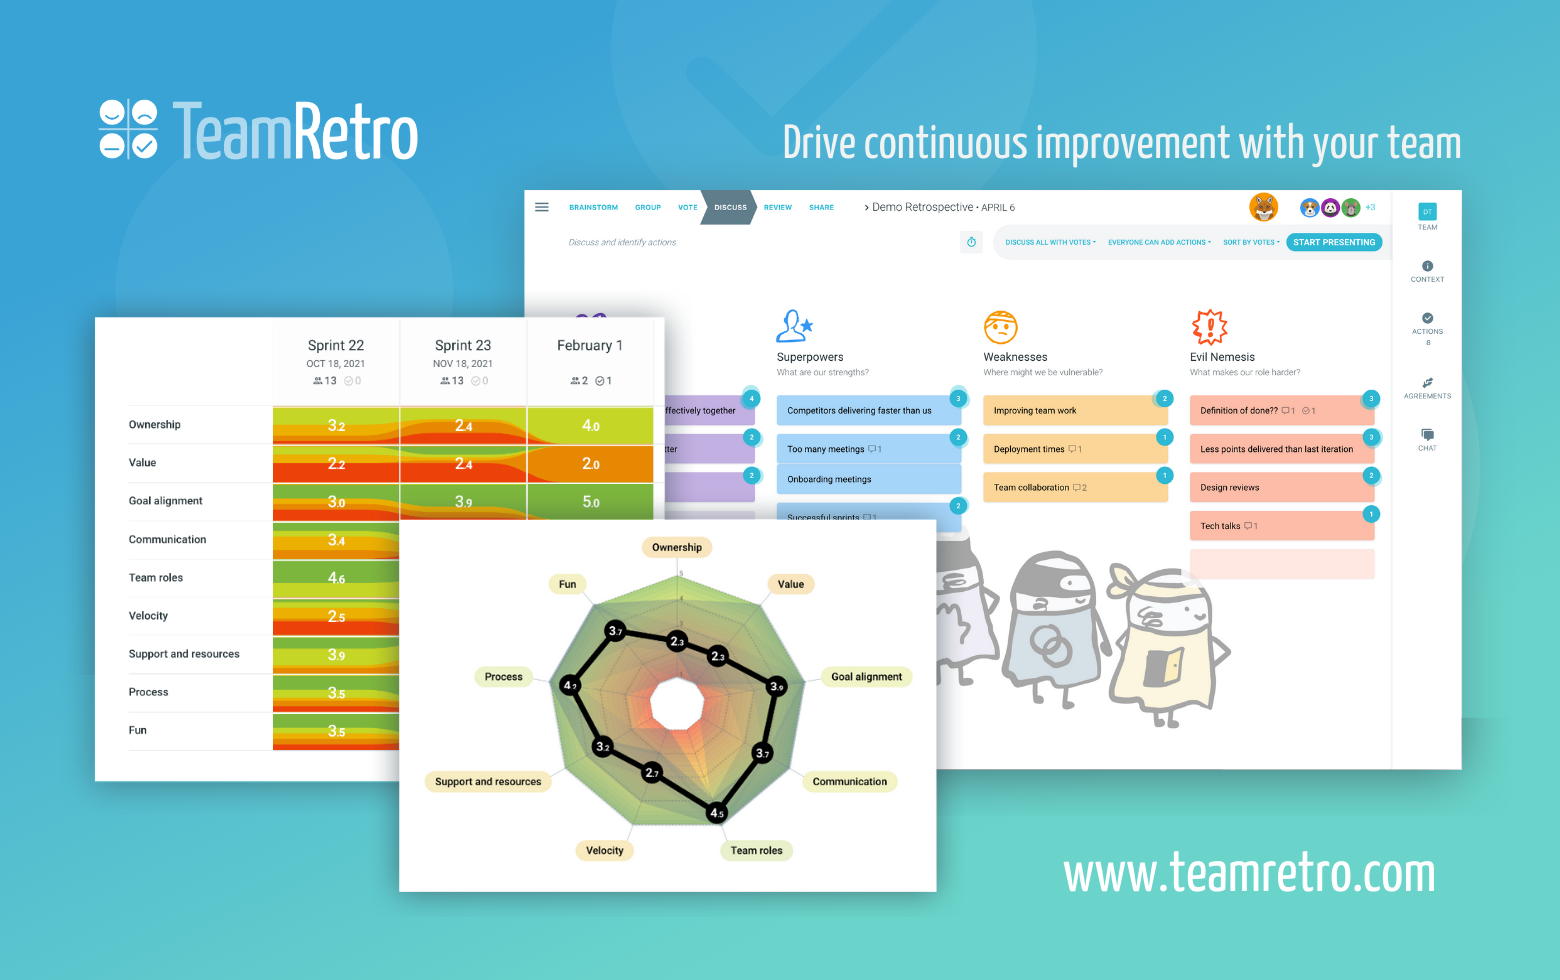 TeamRetro integrates with your existing workflow to elevate the continuous improvement of your product and team.